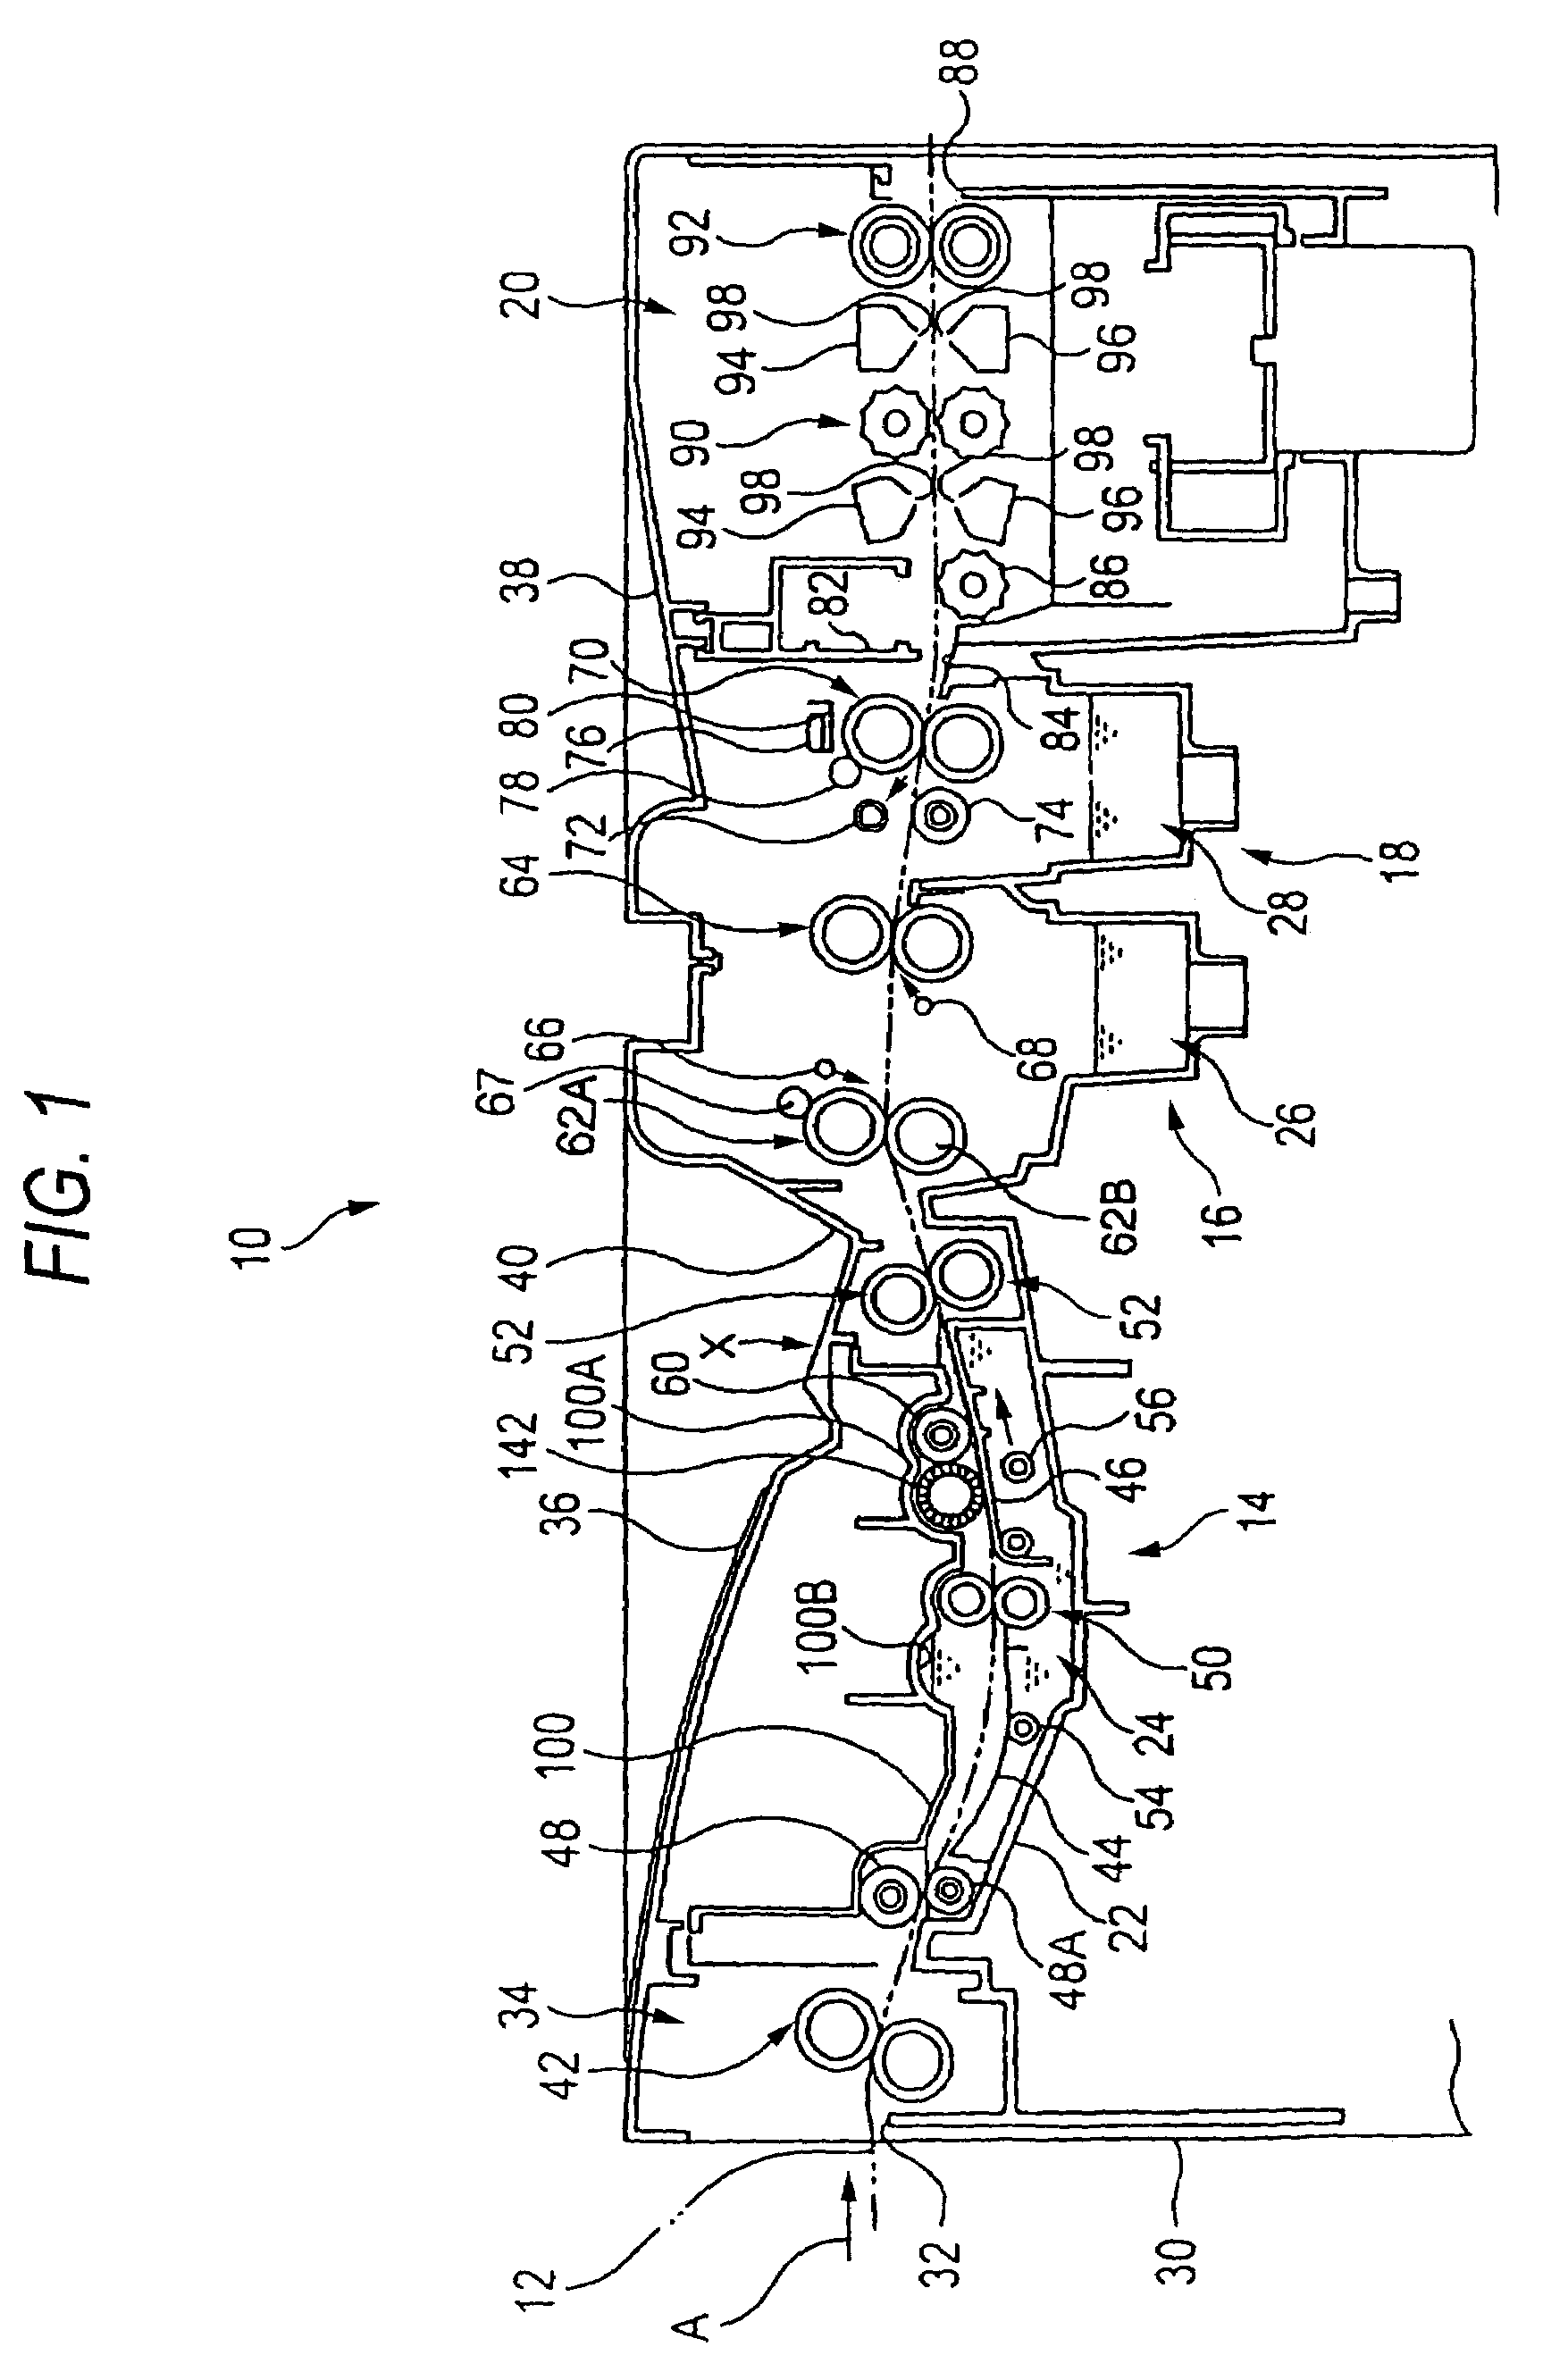 Processing apparatus for lithographic printing plate and process for processing the same